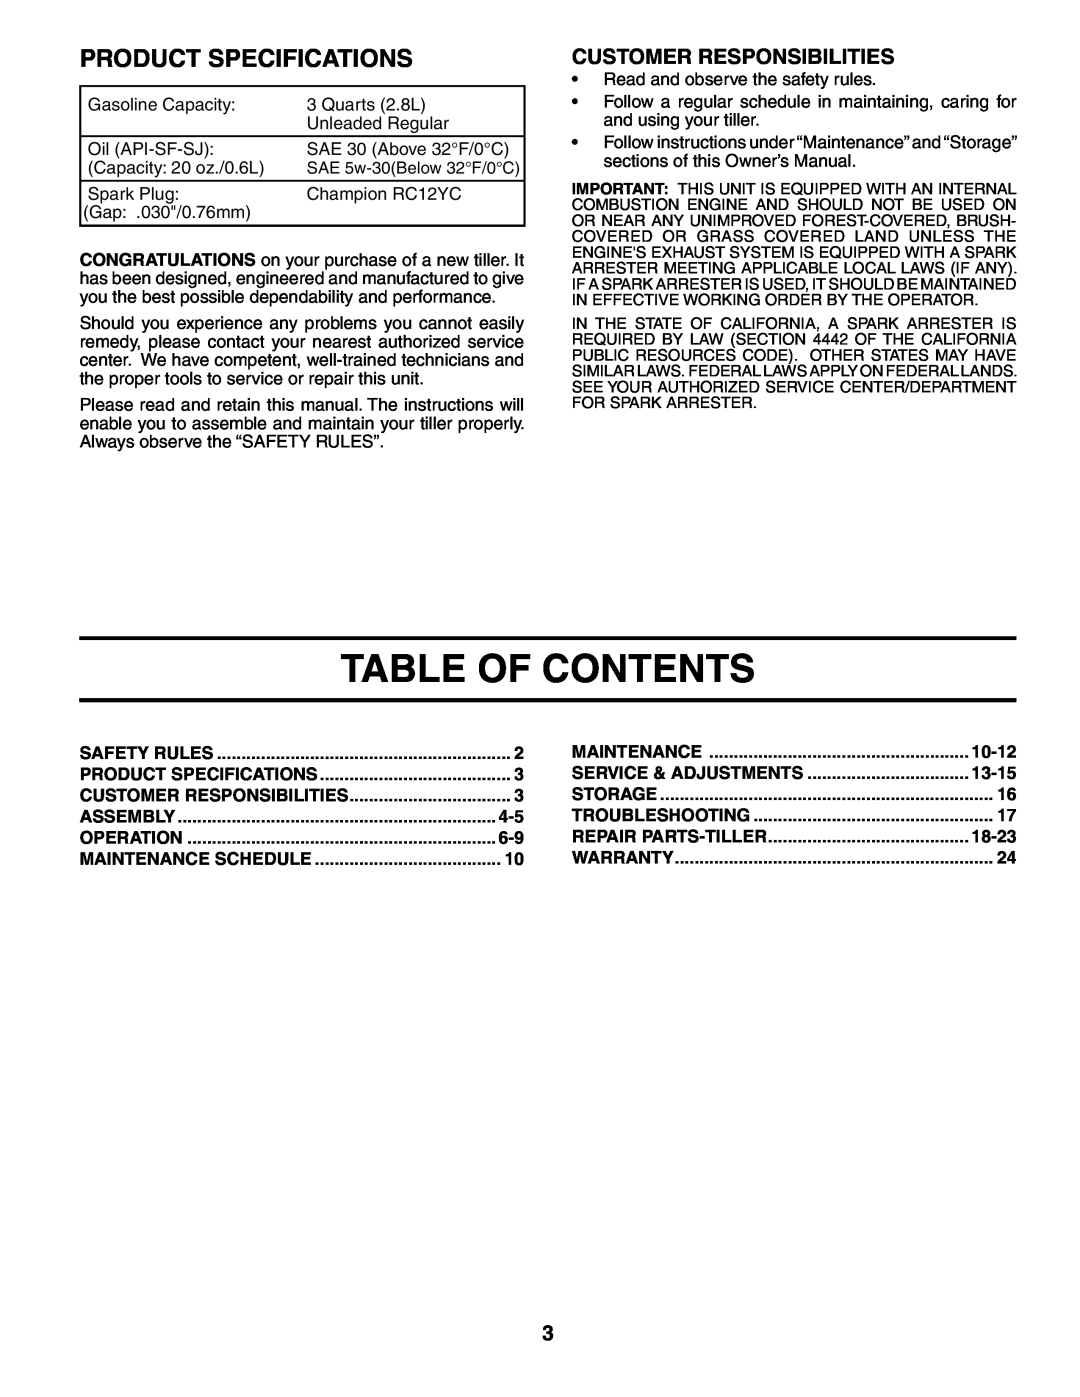 Poulan HDF550N owner manual Table Of Contents, Product Specifications, Customer Responsibilities, 10-12, 13-15, 18-23 